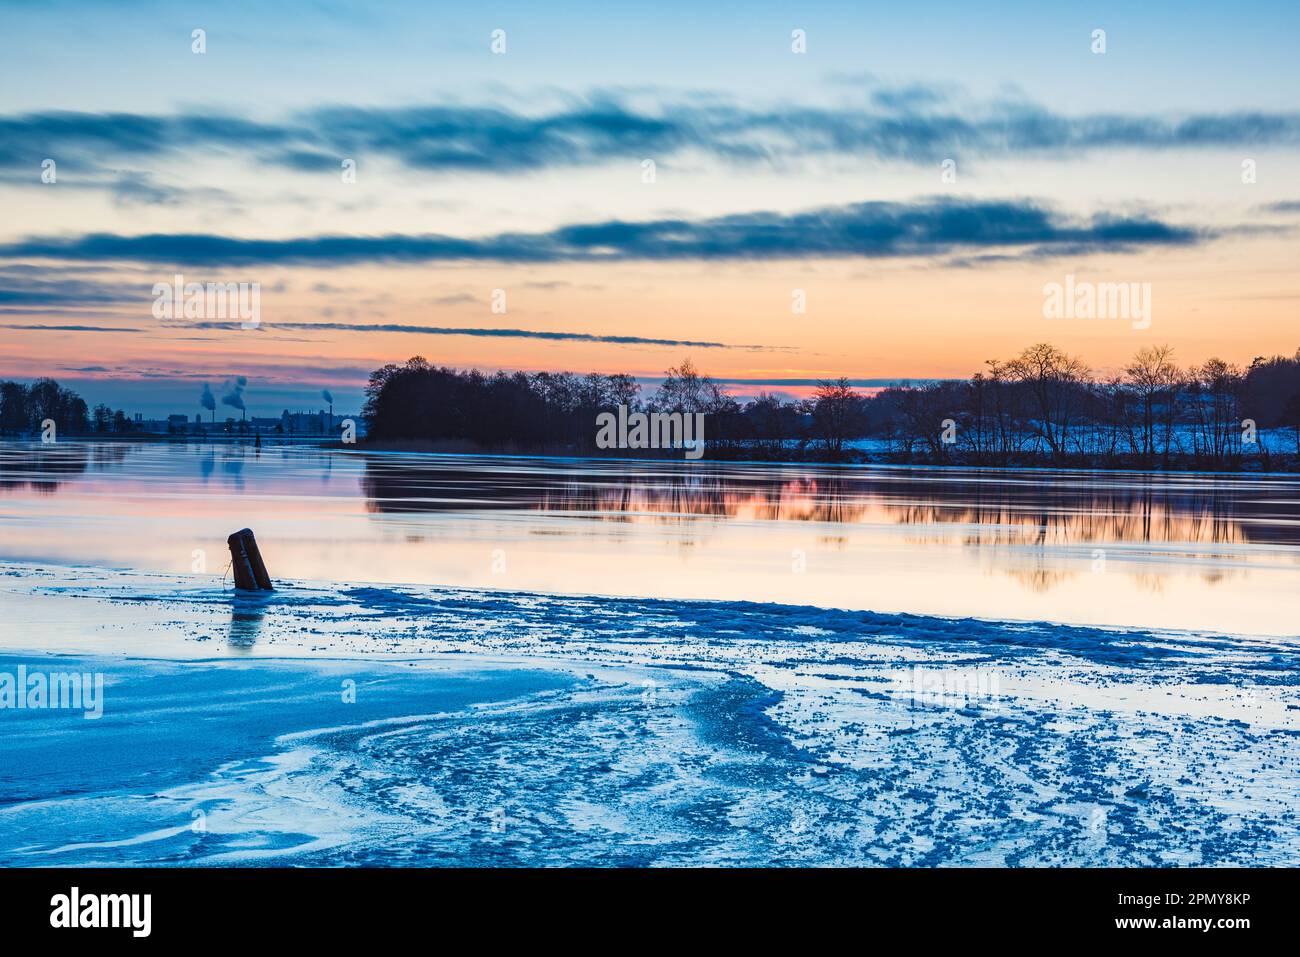 The beauty of nature is reflected in the frozen river at dusk on a cold winter night. The sky and shore glisten with ice as the sun sets. Stock Photo